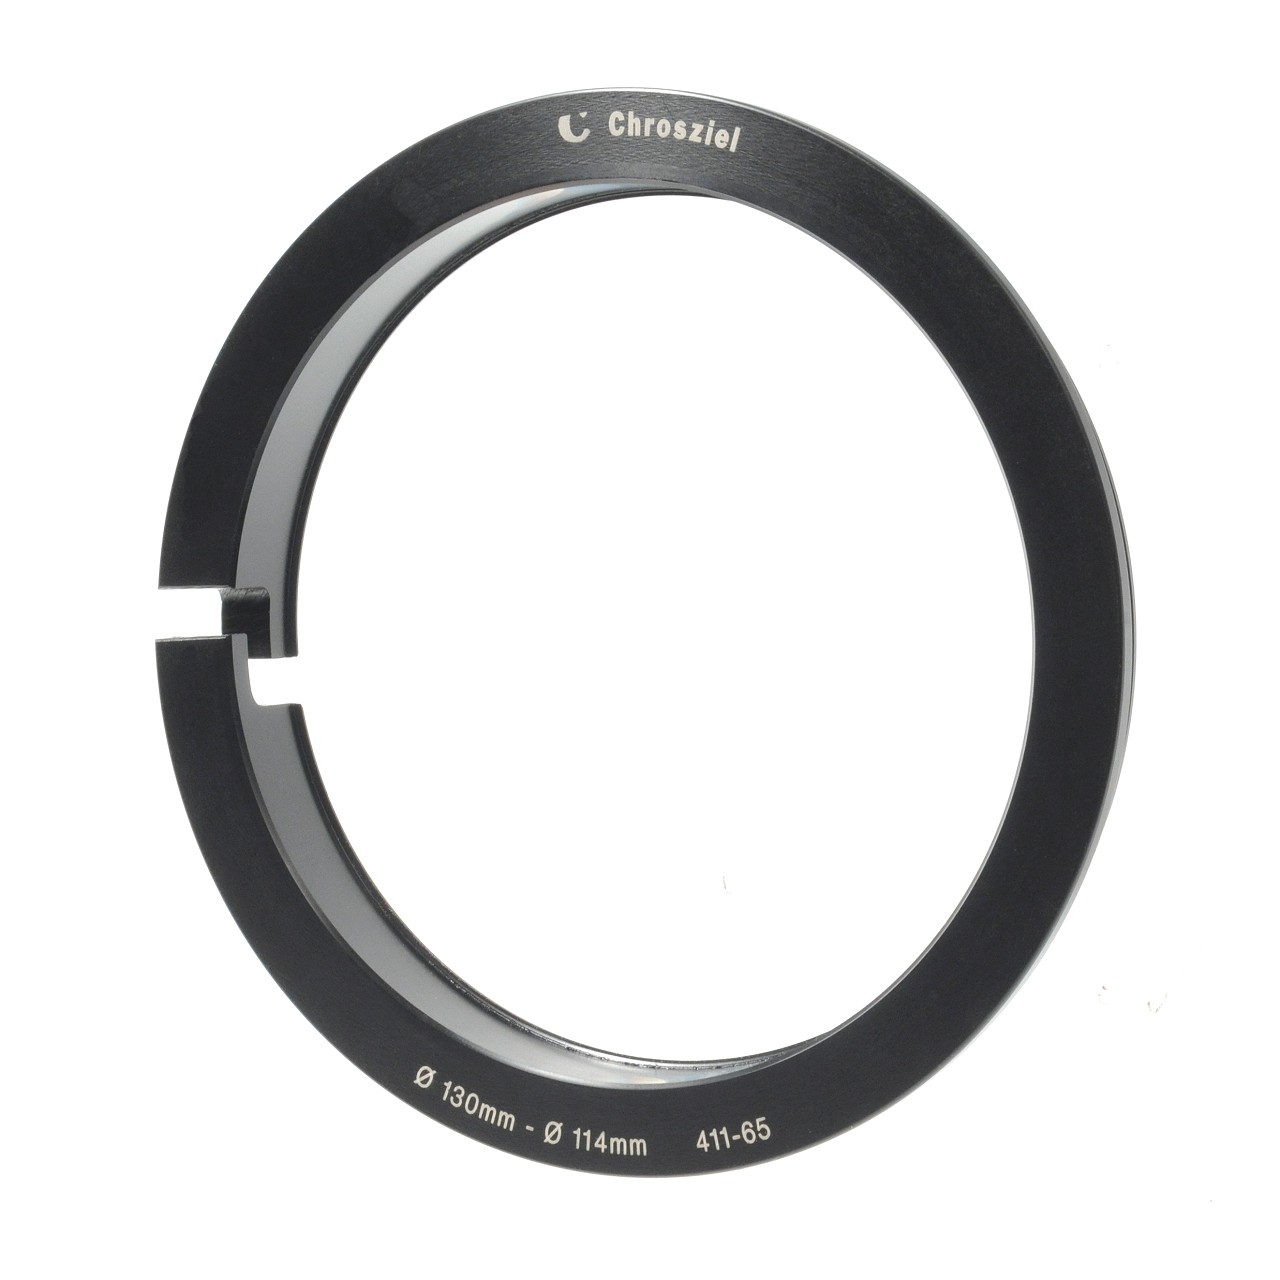 Step-down Ring Ø 130:114mm for MB456, MB450 and SD412